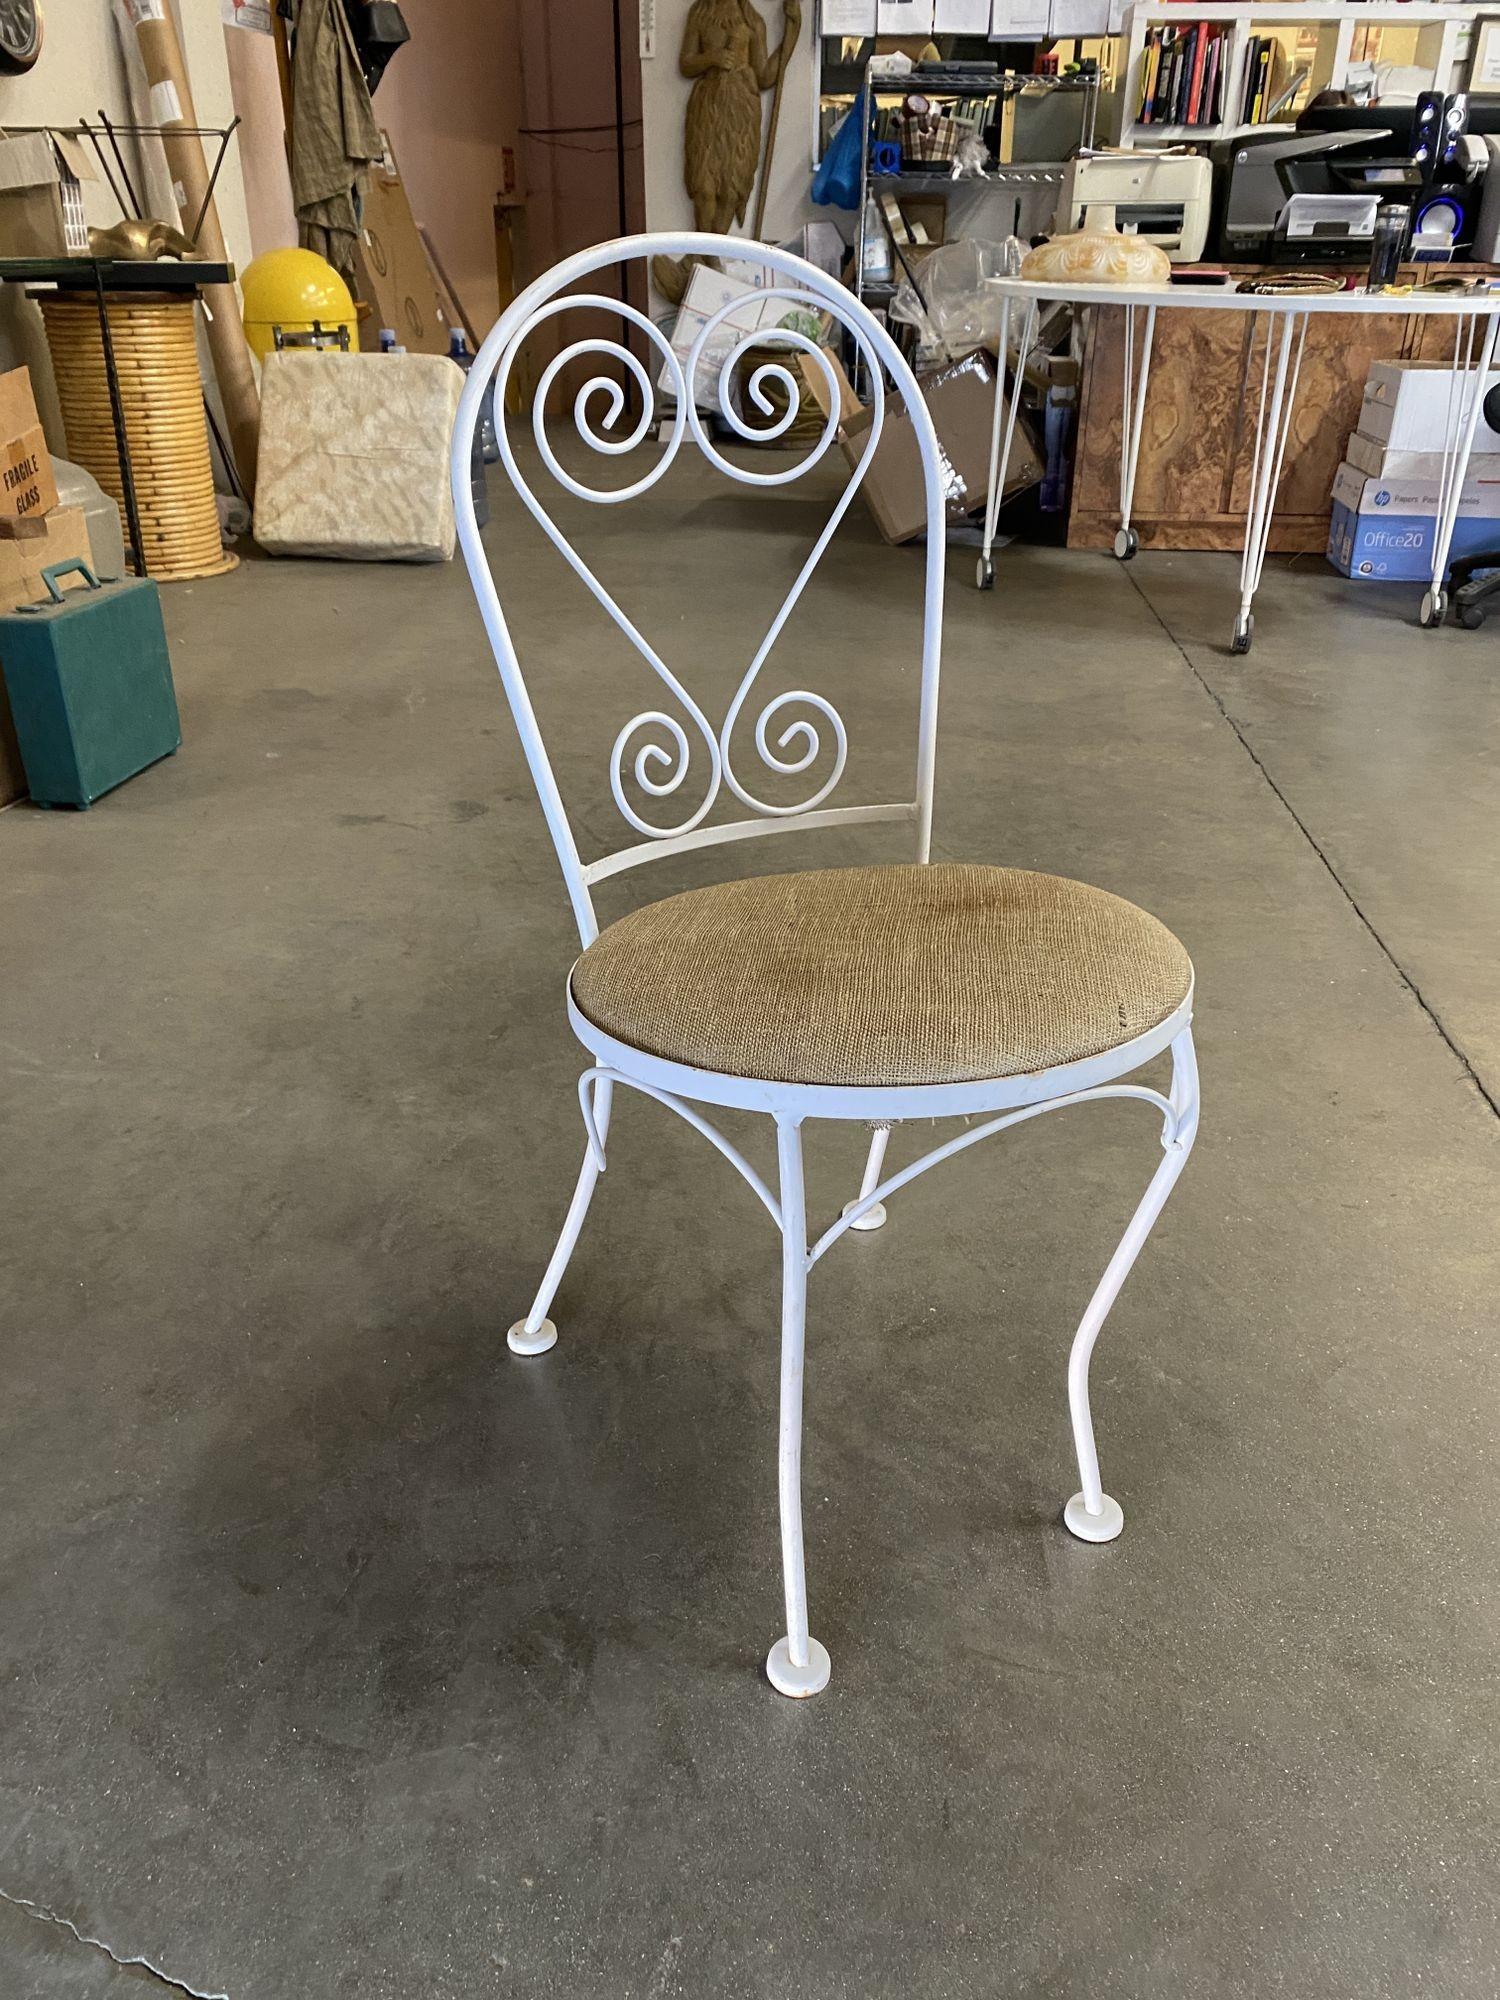 Mid-century Iron Bistro outdoor/patio set includes both tables with chairs, a distinct scrolling backrest, and table decor. This set was constructed with solid-core iron castings and is finished in white. Similar to the patio sets found in Italy and